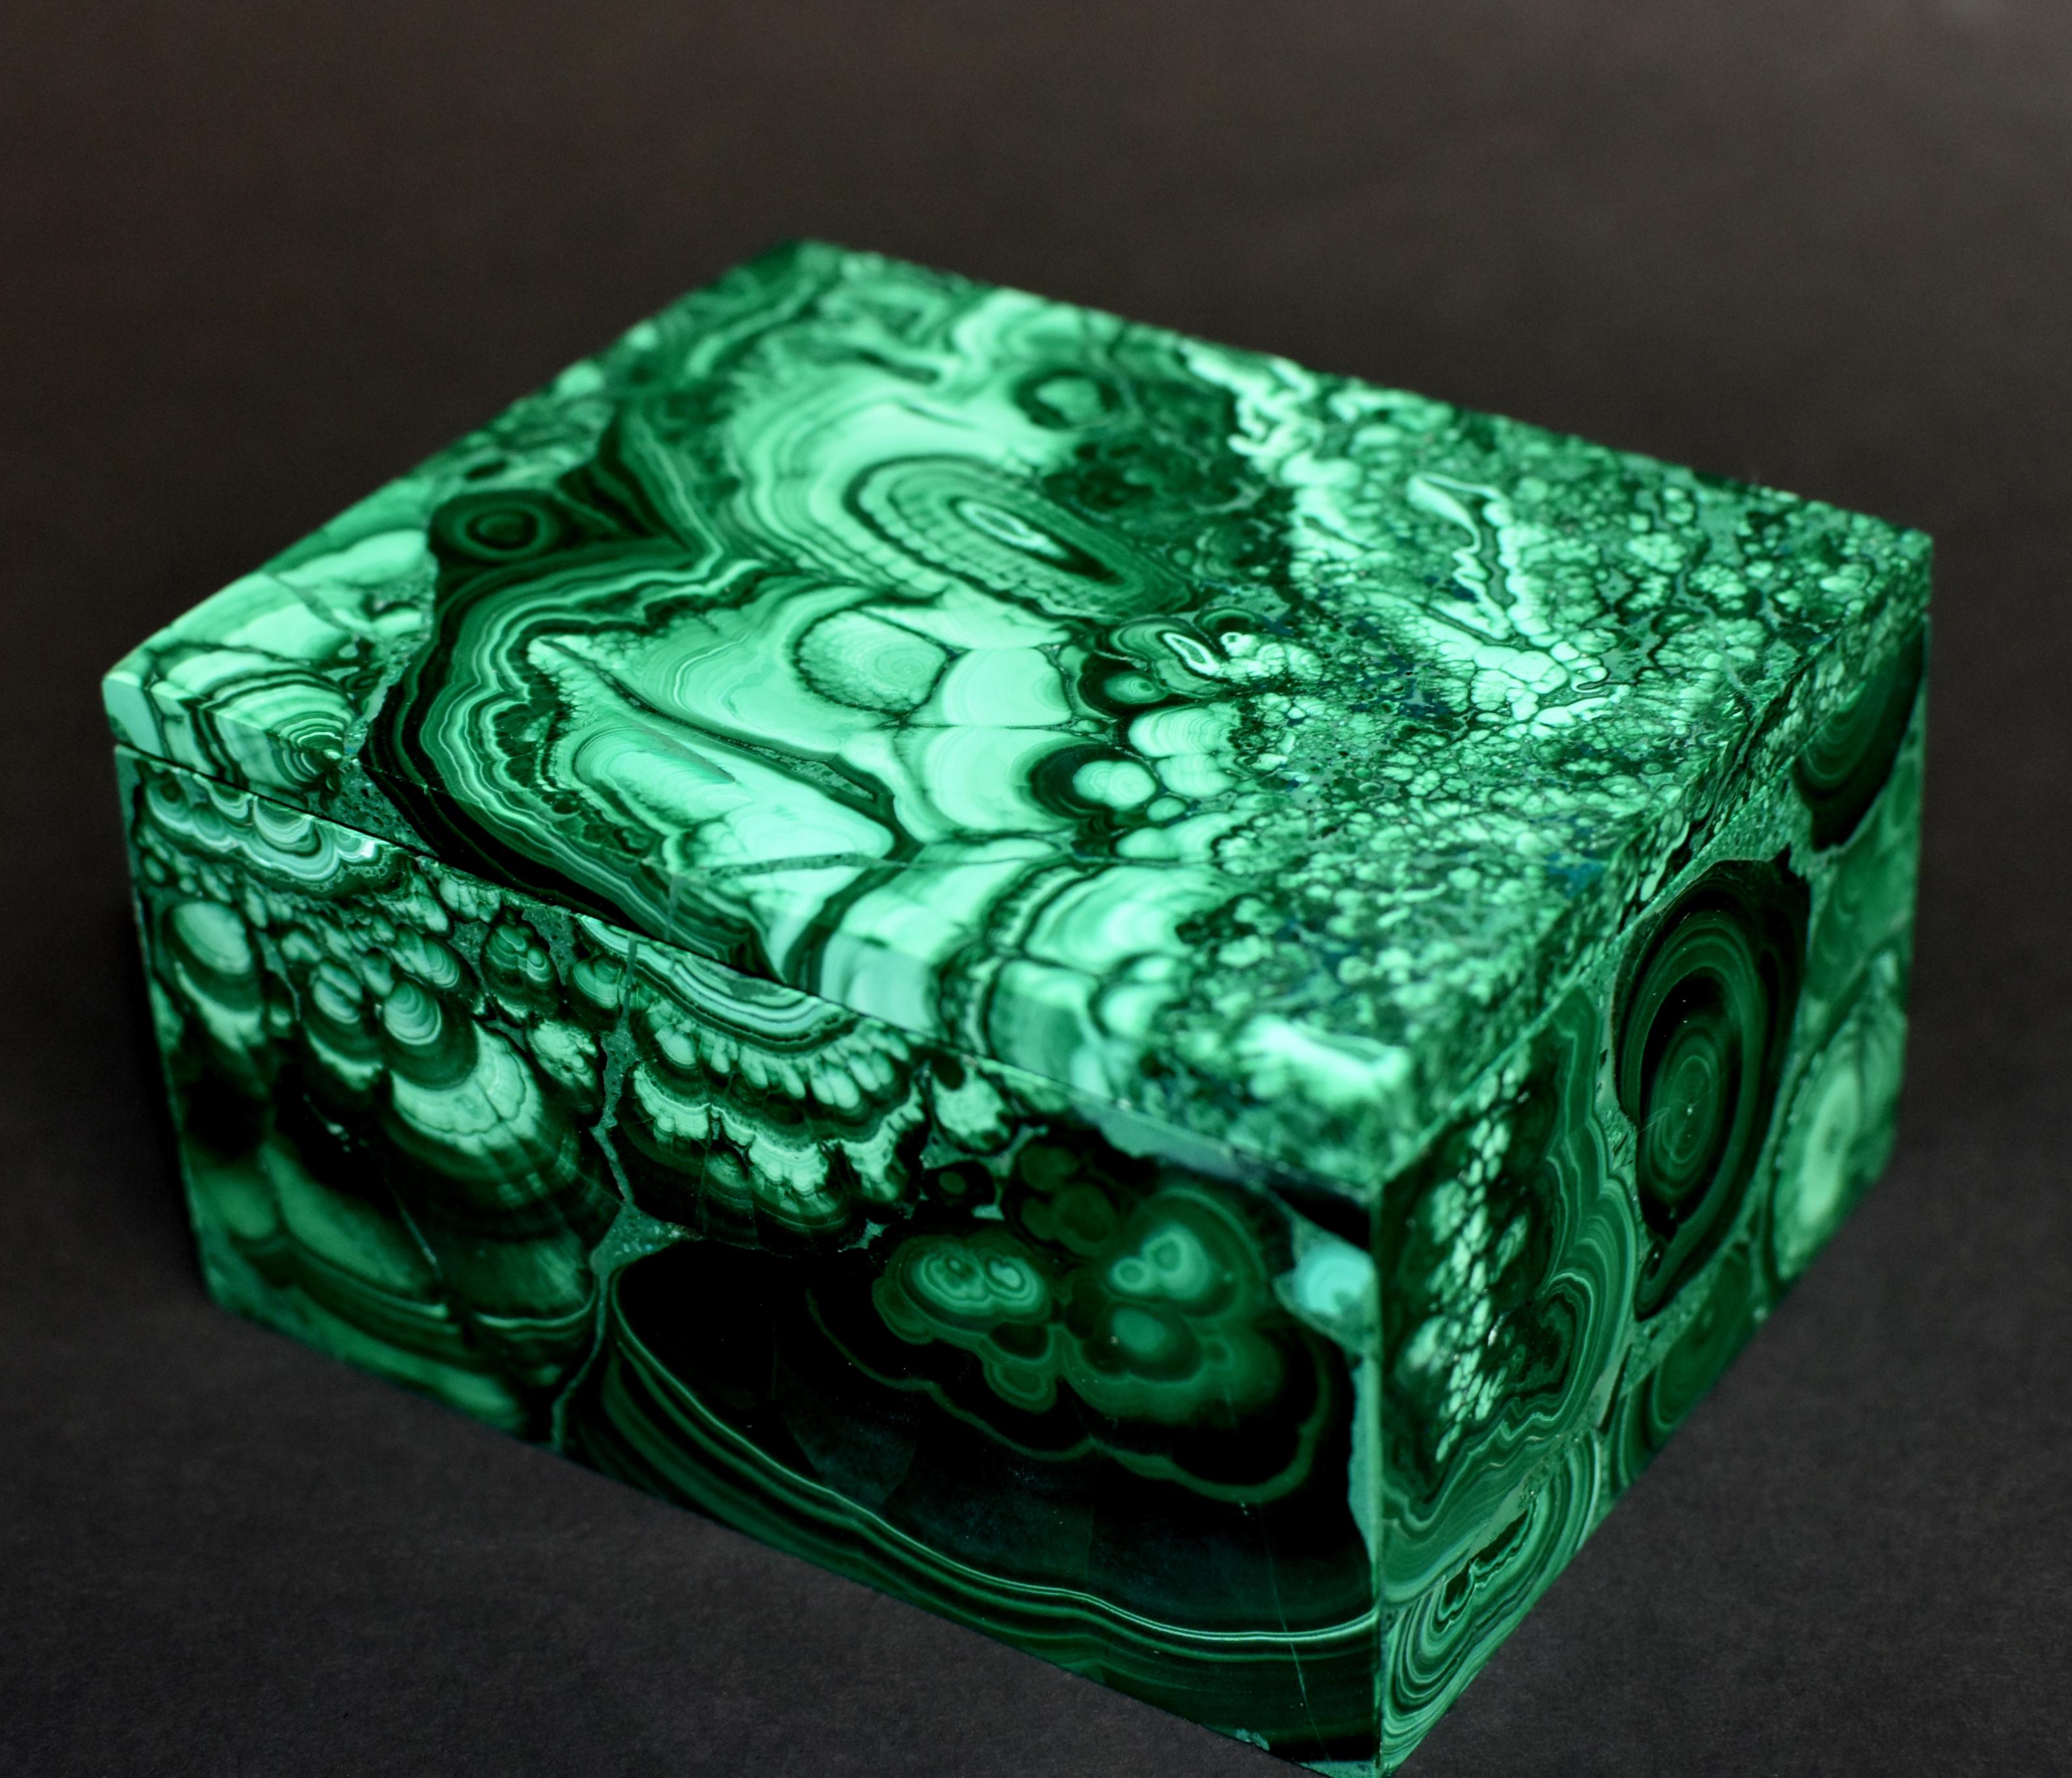 Stunning 1.4 lb full-slab all natural malachite box. Splendid swirls and patterns, this remarkable piece is a symbol of luxury and high sophistication. Handmade with custom fit top. Malachite is a stone of transformation, helping one achieve balance